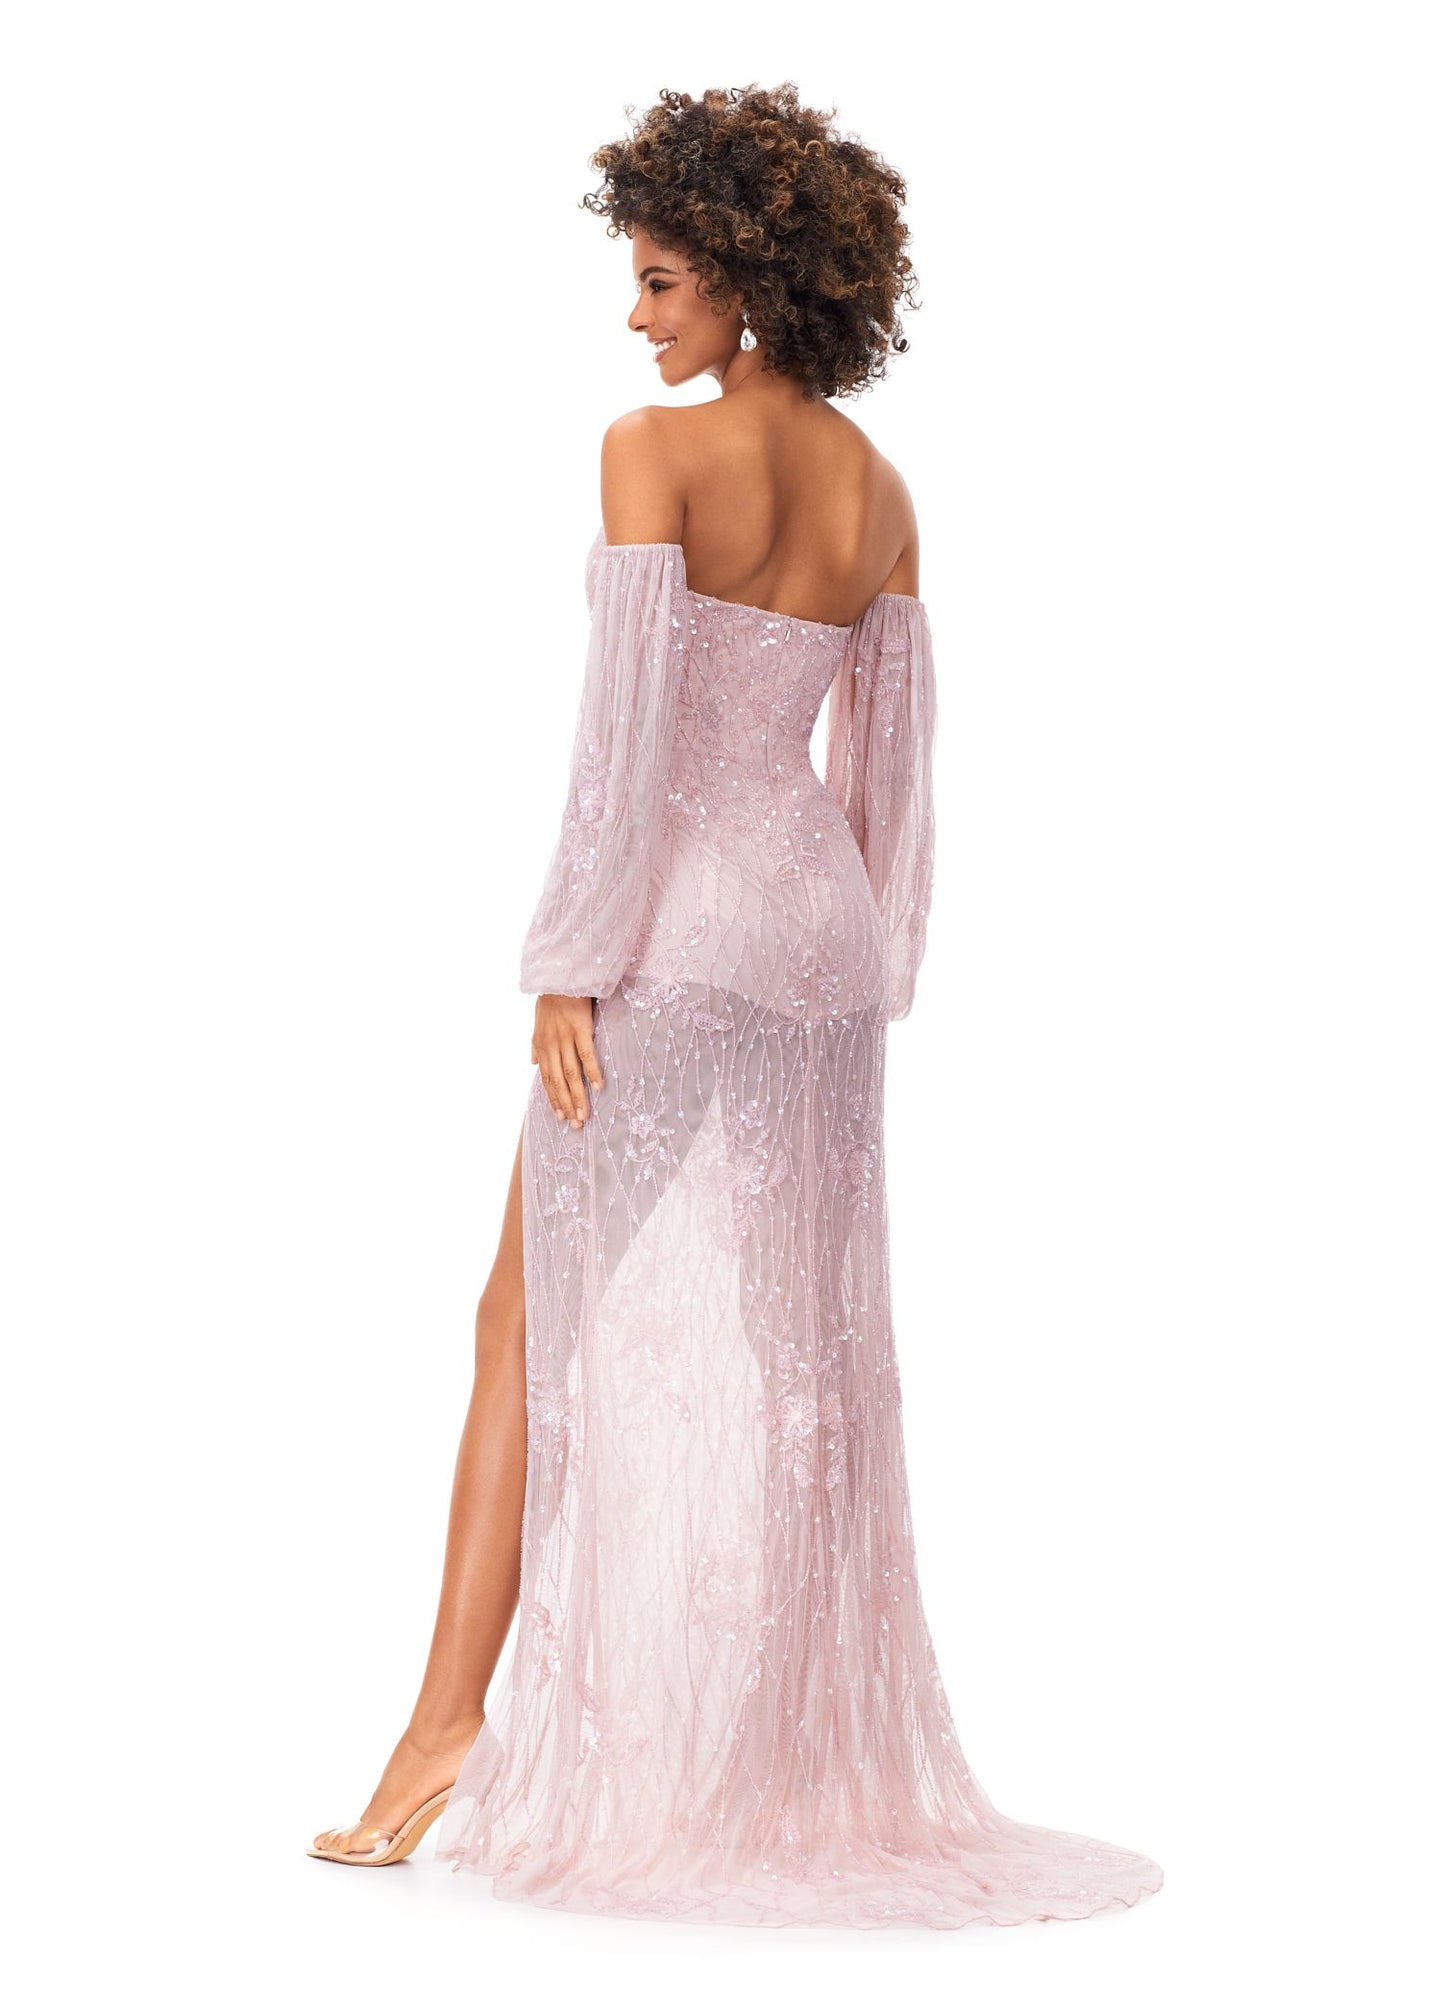 Ashley Lauren 11304 Strapless Gown with Long Puff Sleeves